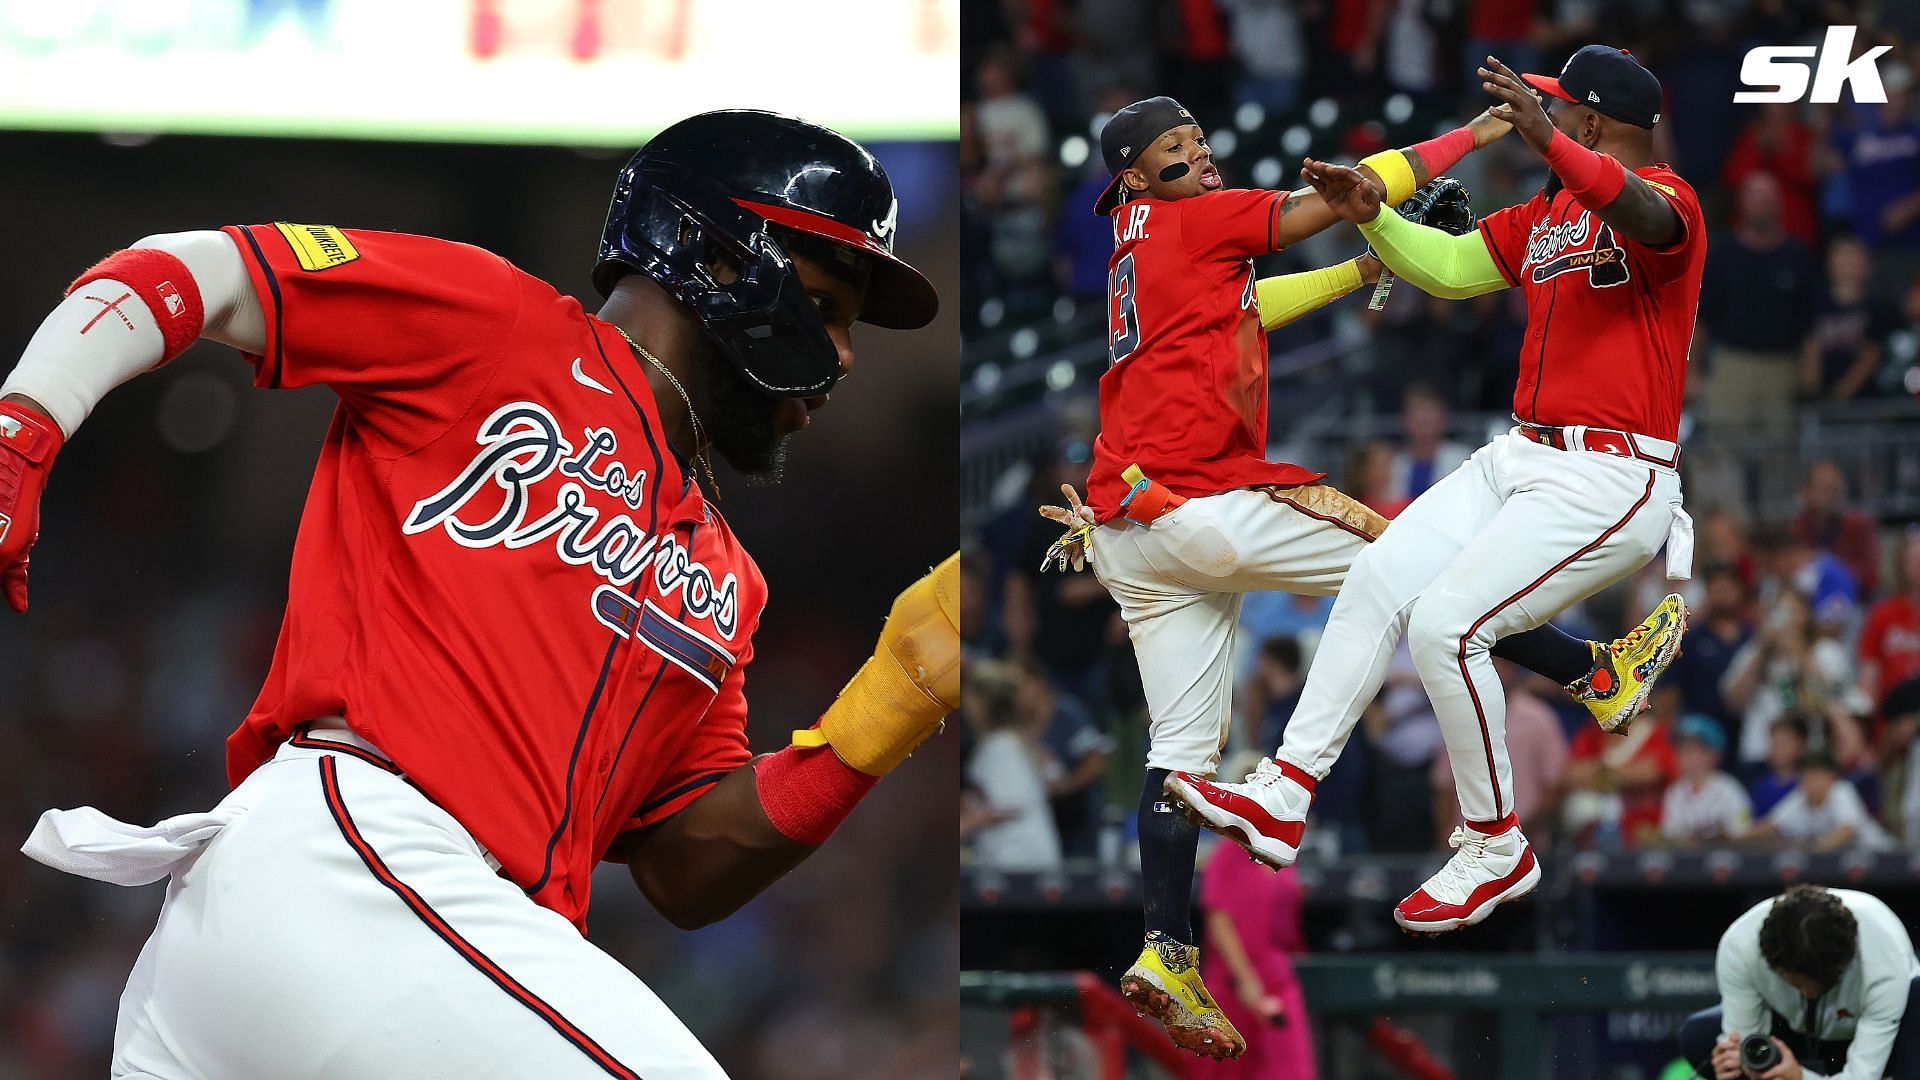 MLB fans acknowledge Braves clinching best record and home field advantage for playoffs. 